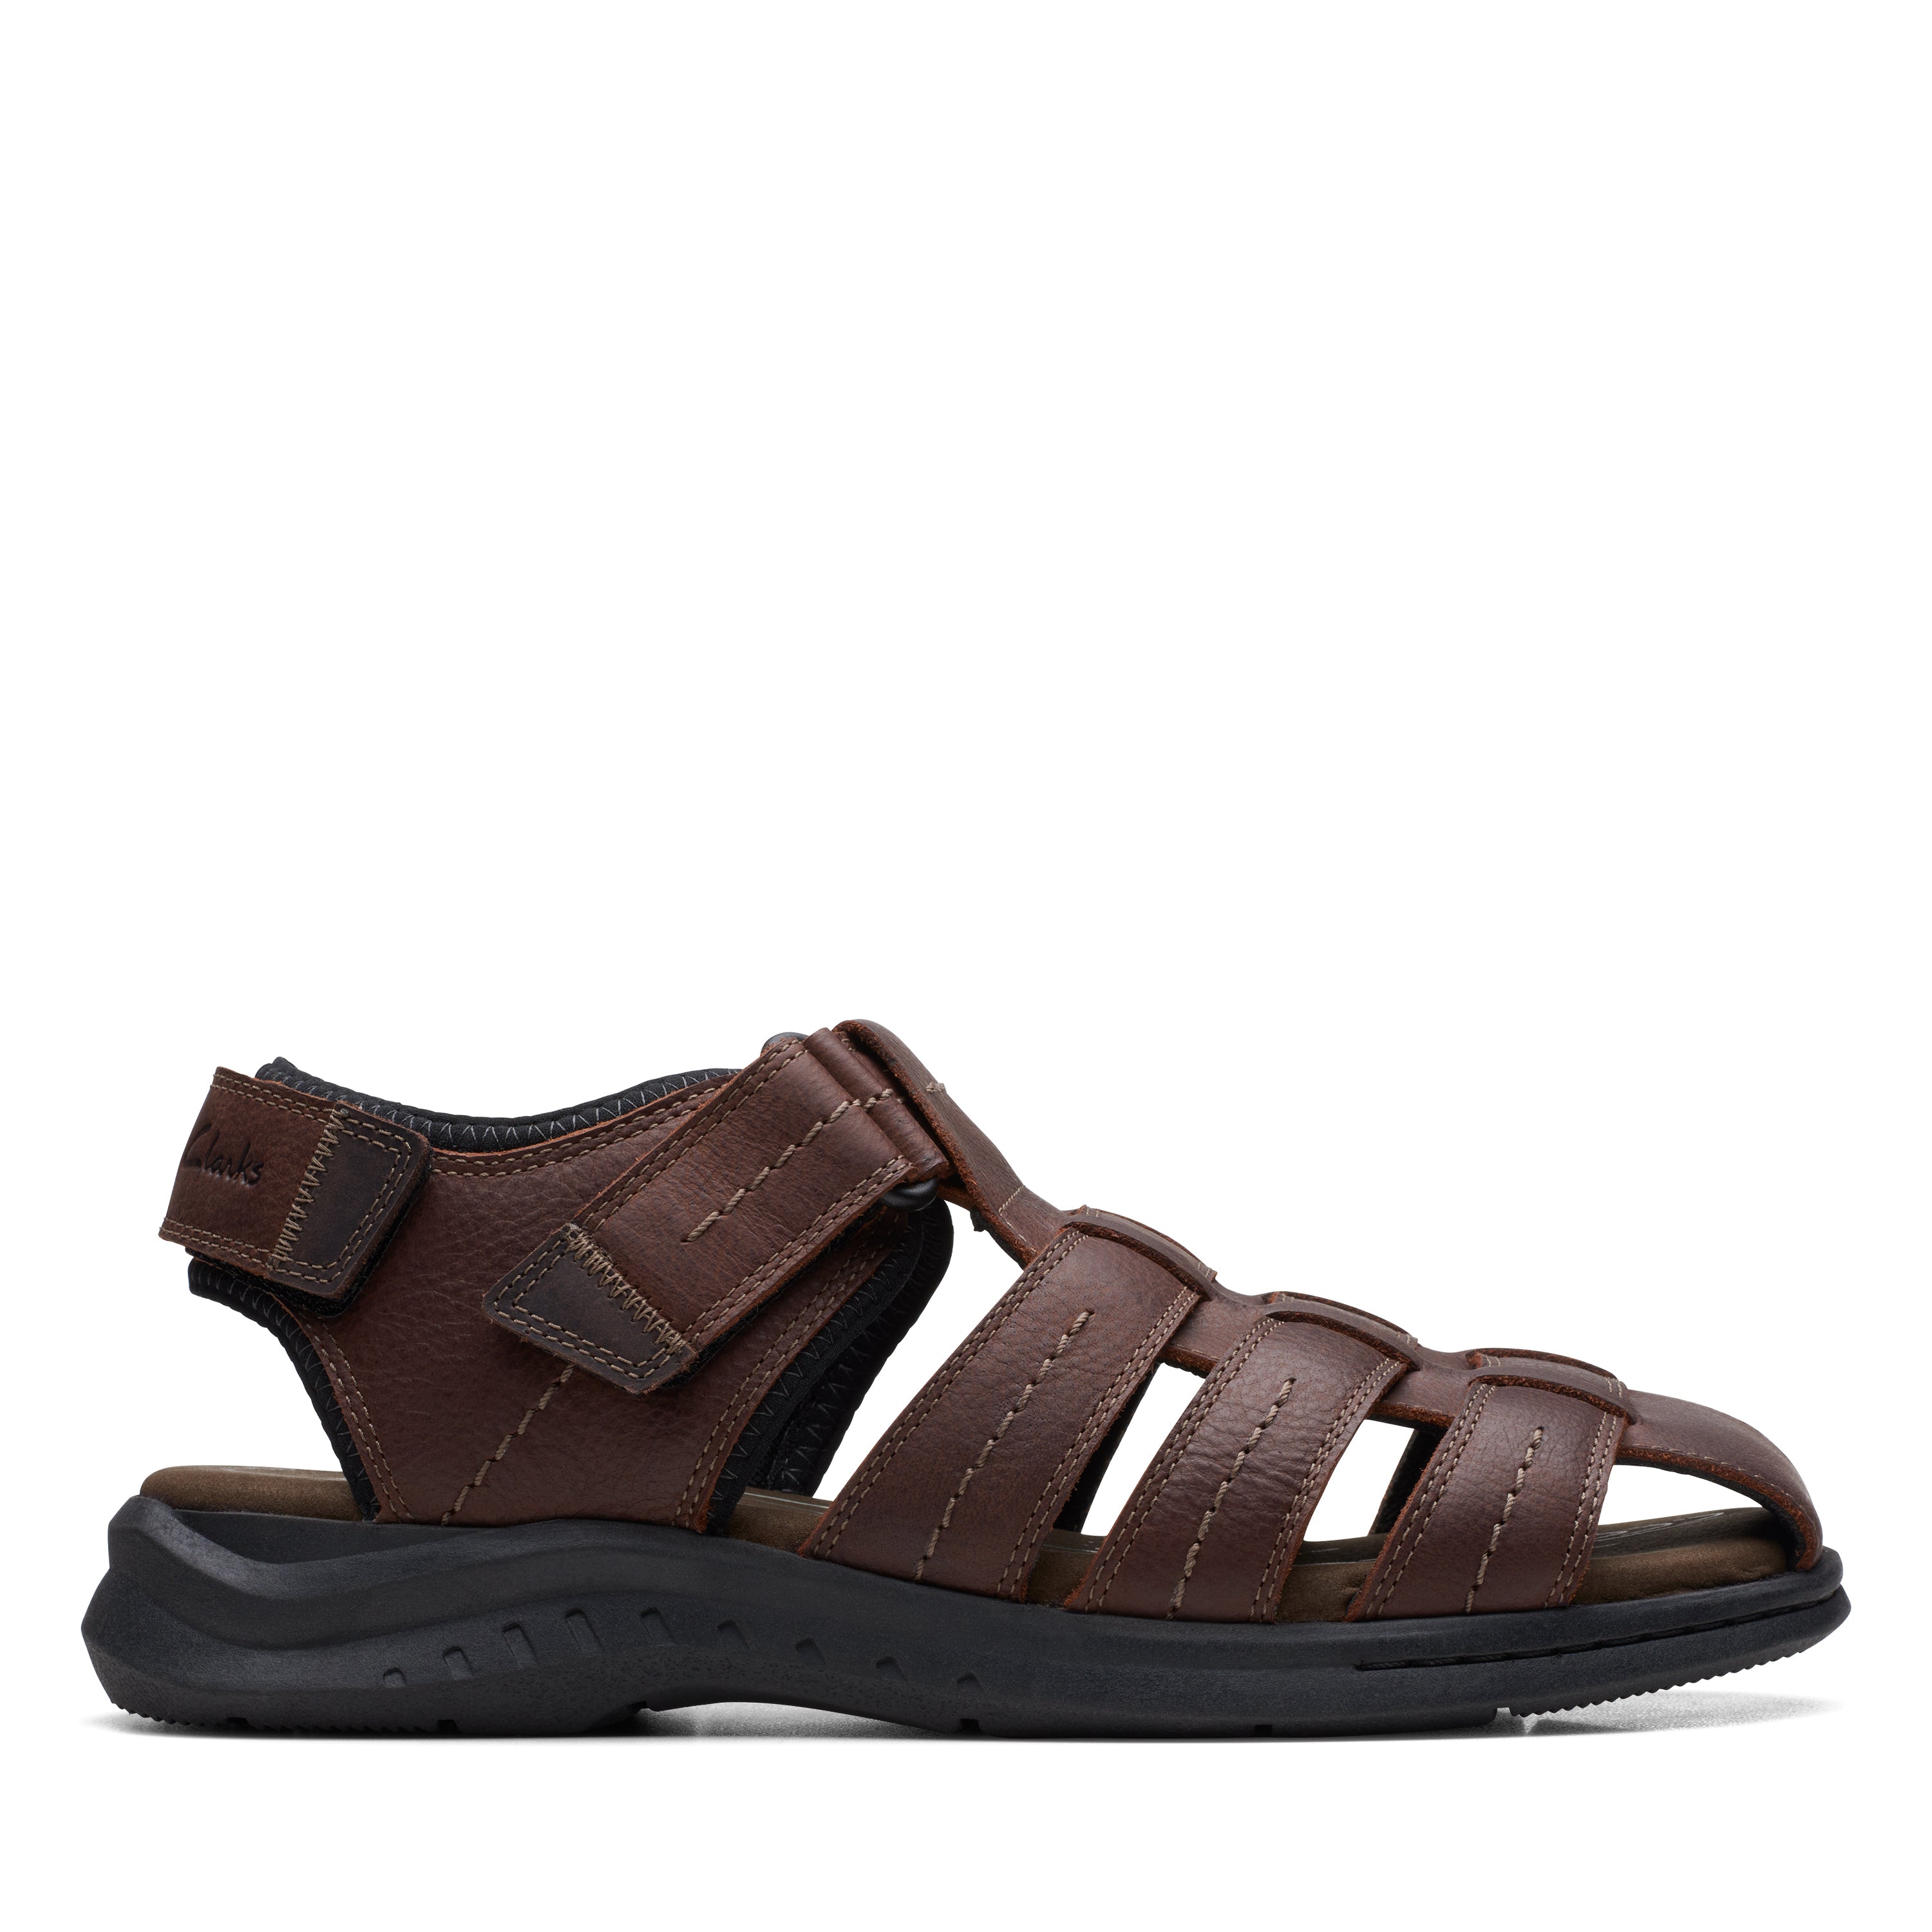 clarks mens leather sandals products for sale | eBay